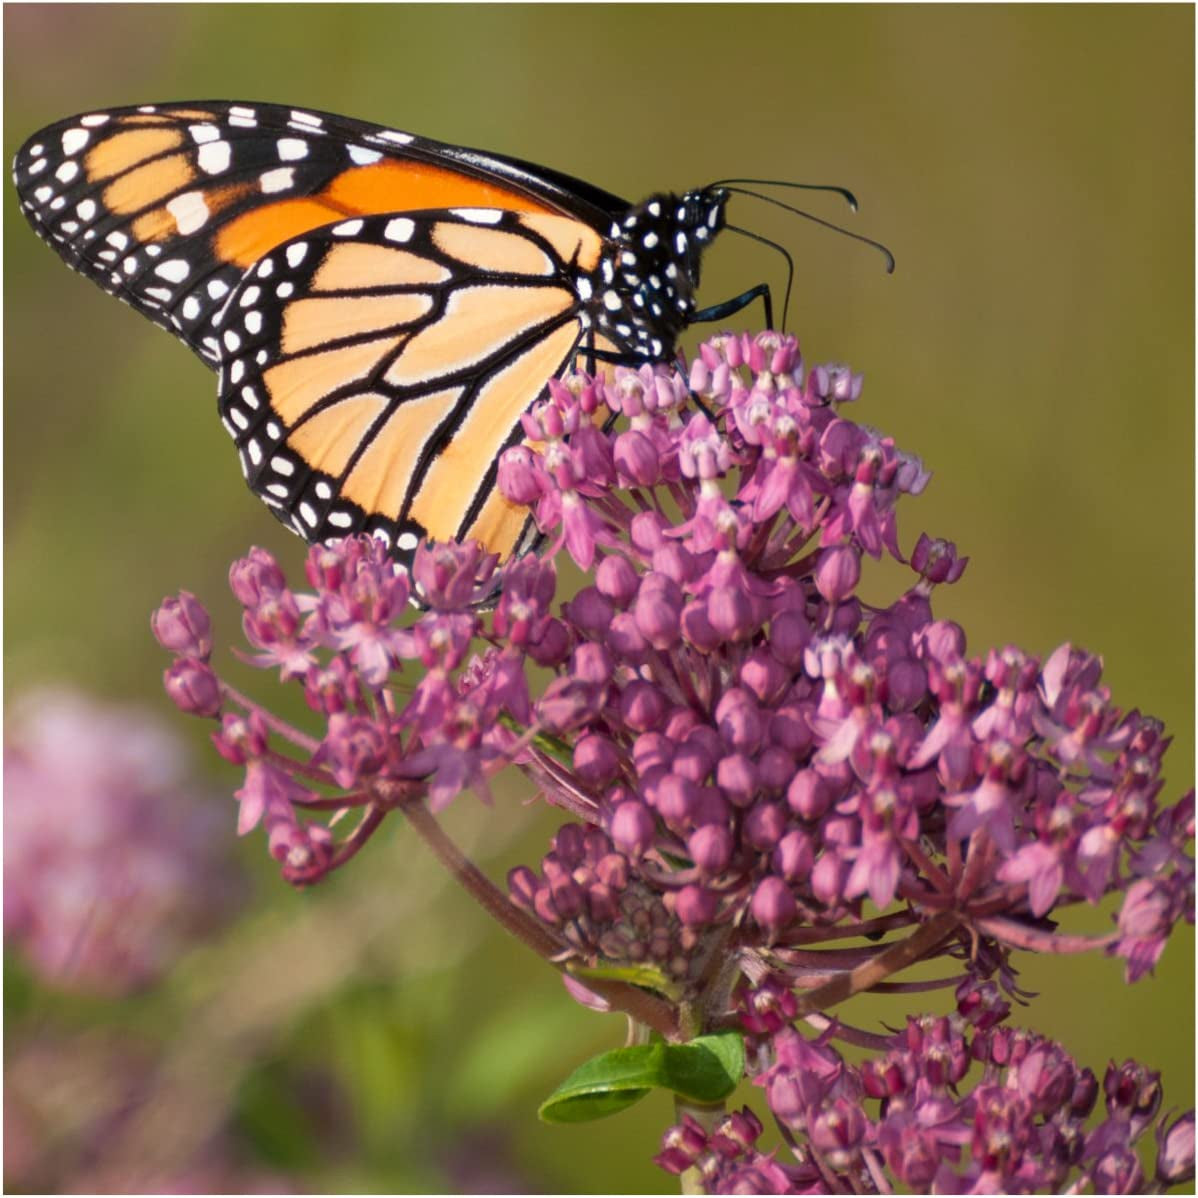 Pink Swamp Milkweed Seeds for Planting (Asclepias incarnata) Single Package of 100 Seeds - Heirloom & Untreated, Attracts Monarchs